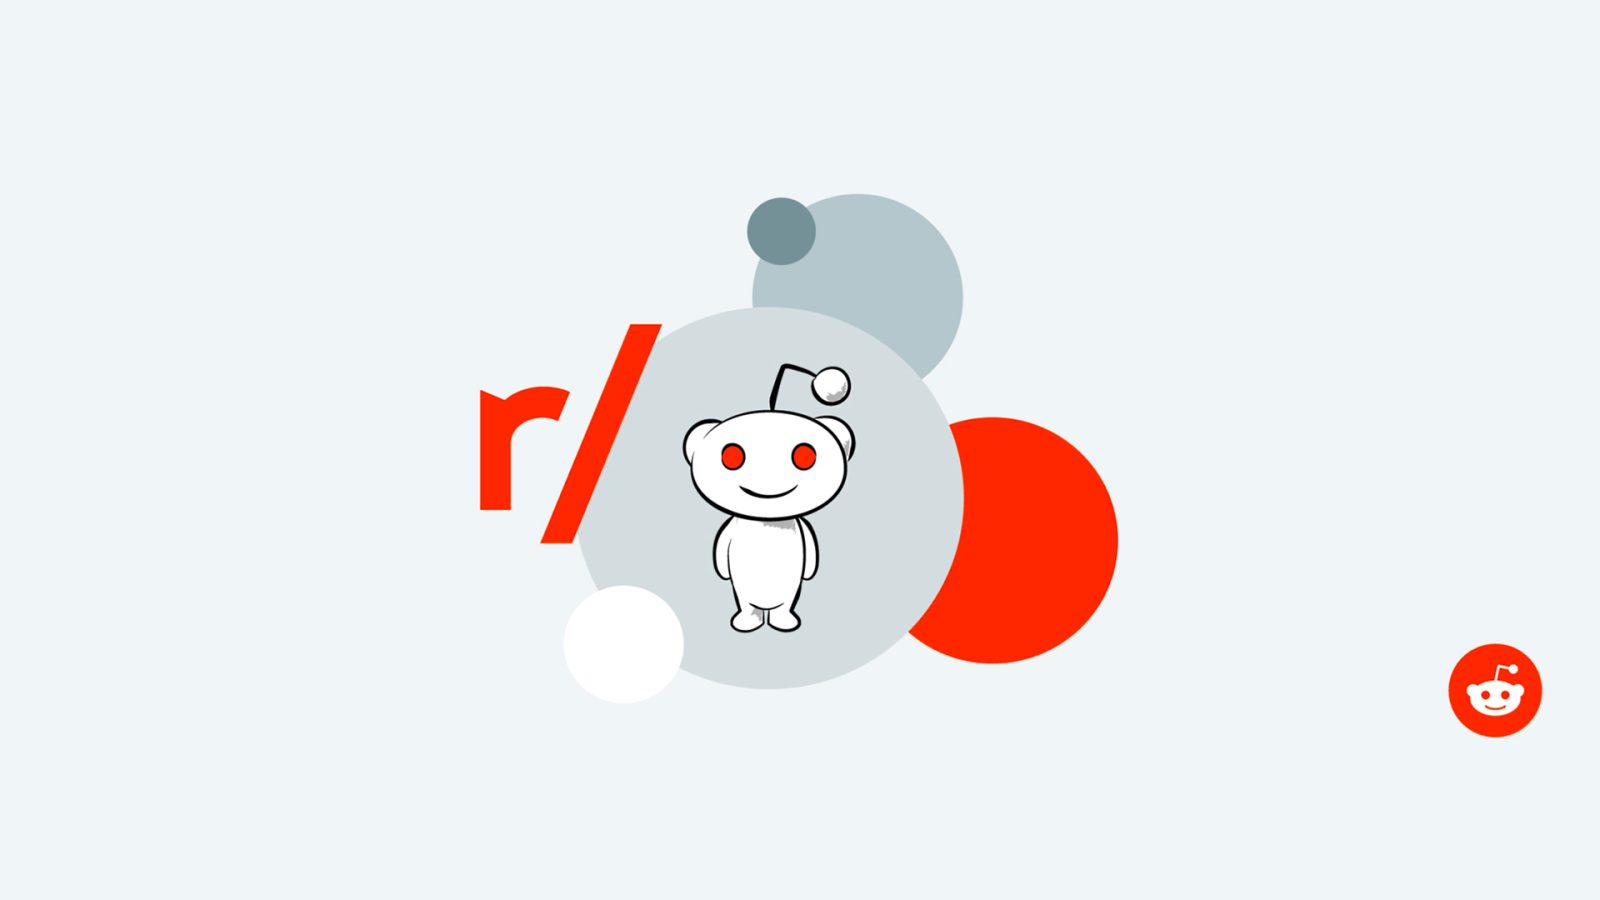 Reddit announces new Developer Platform with resources for third-party extensions